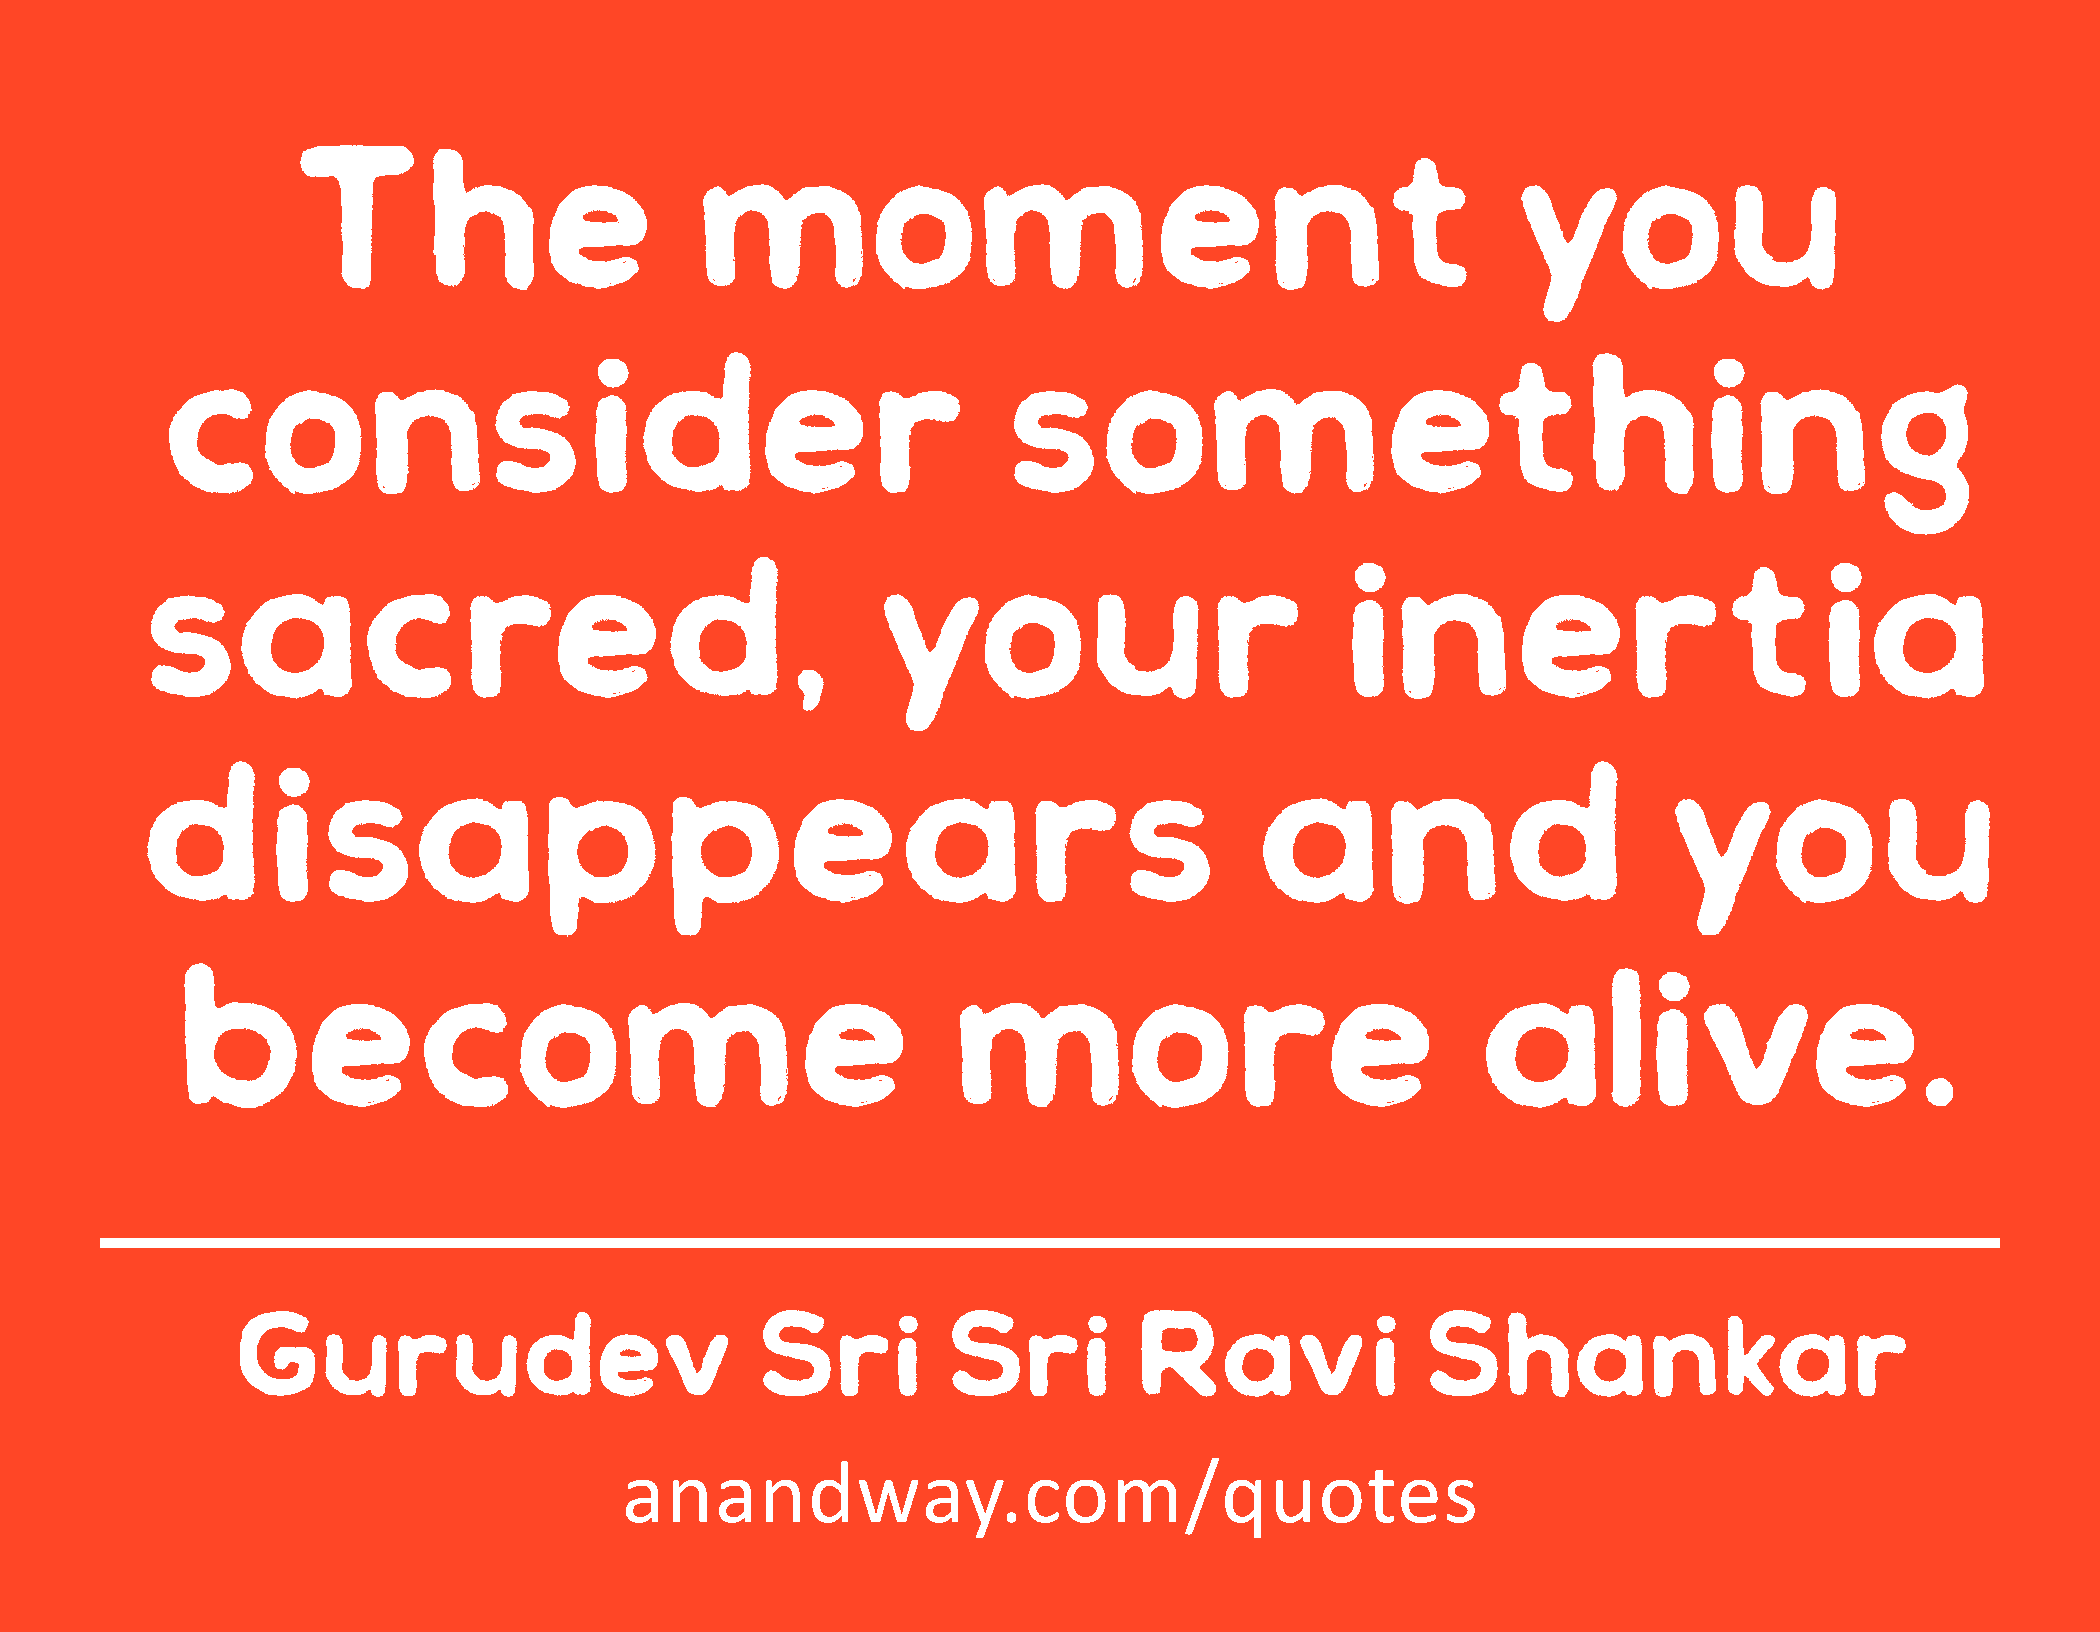 The moment you consider something sacred, your inertia disappears and you become more alive. 
 -Gurudev Sri Sri Ravi Shankar